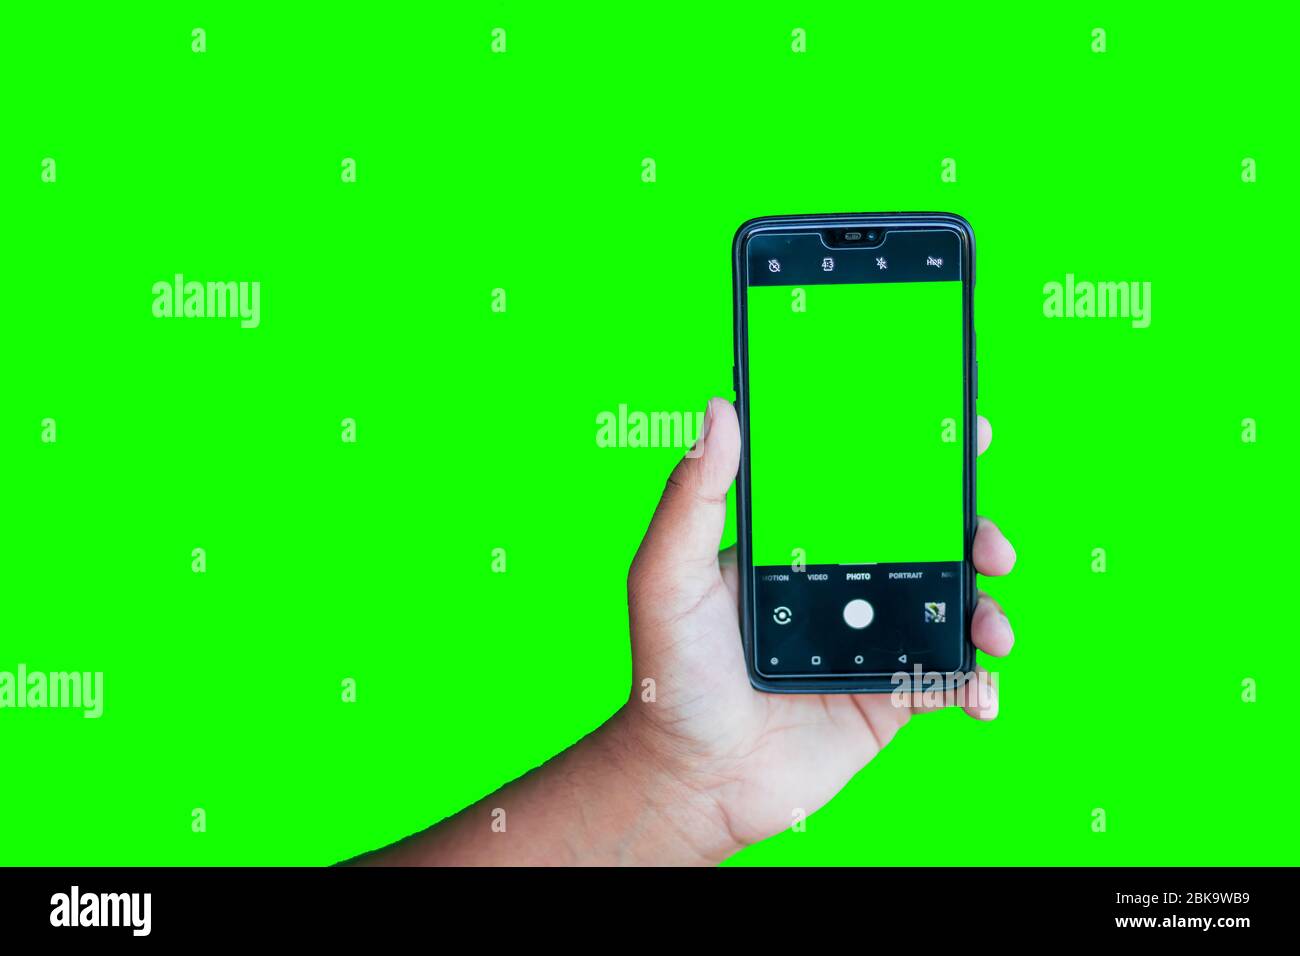 Man holding phone with camera interface against the green screen background Stock Photo